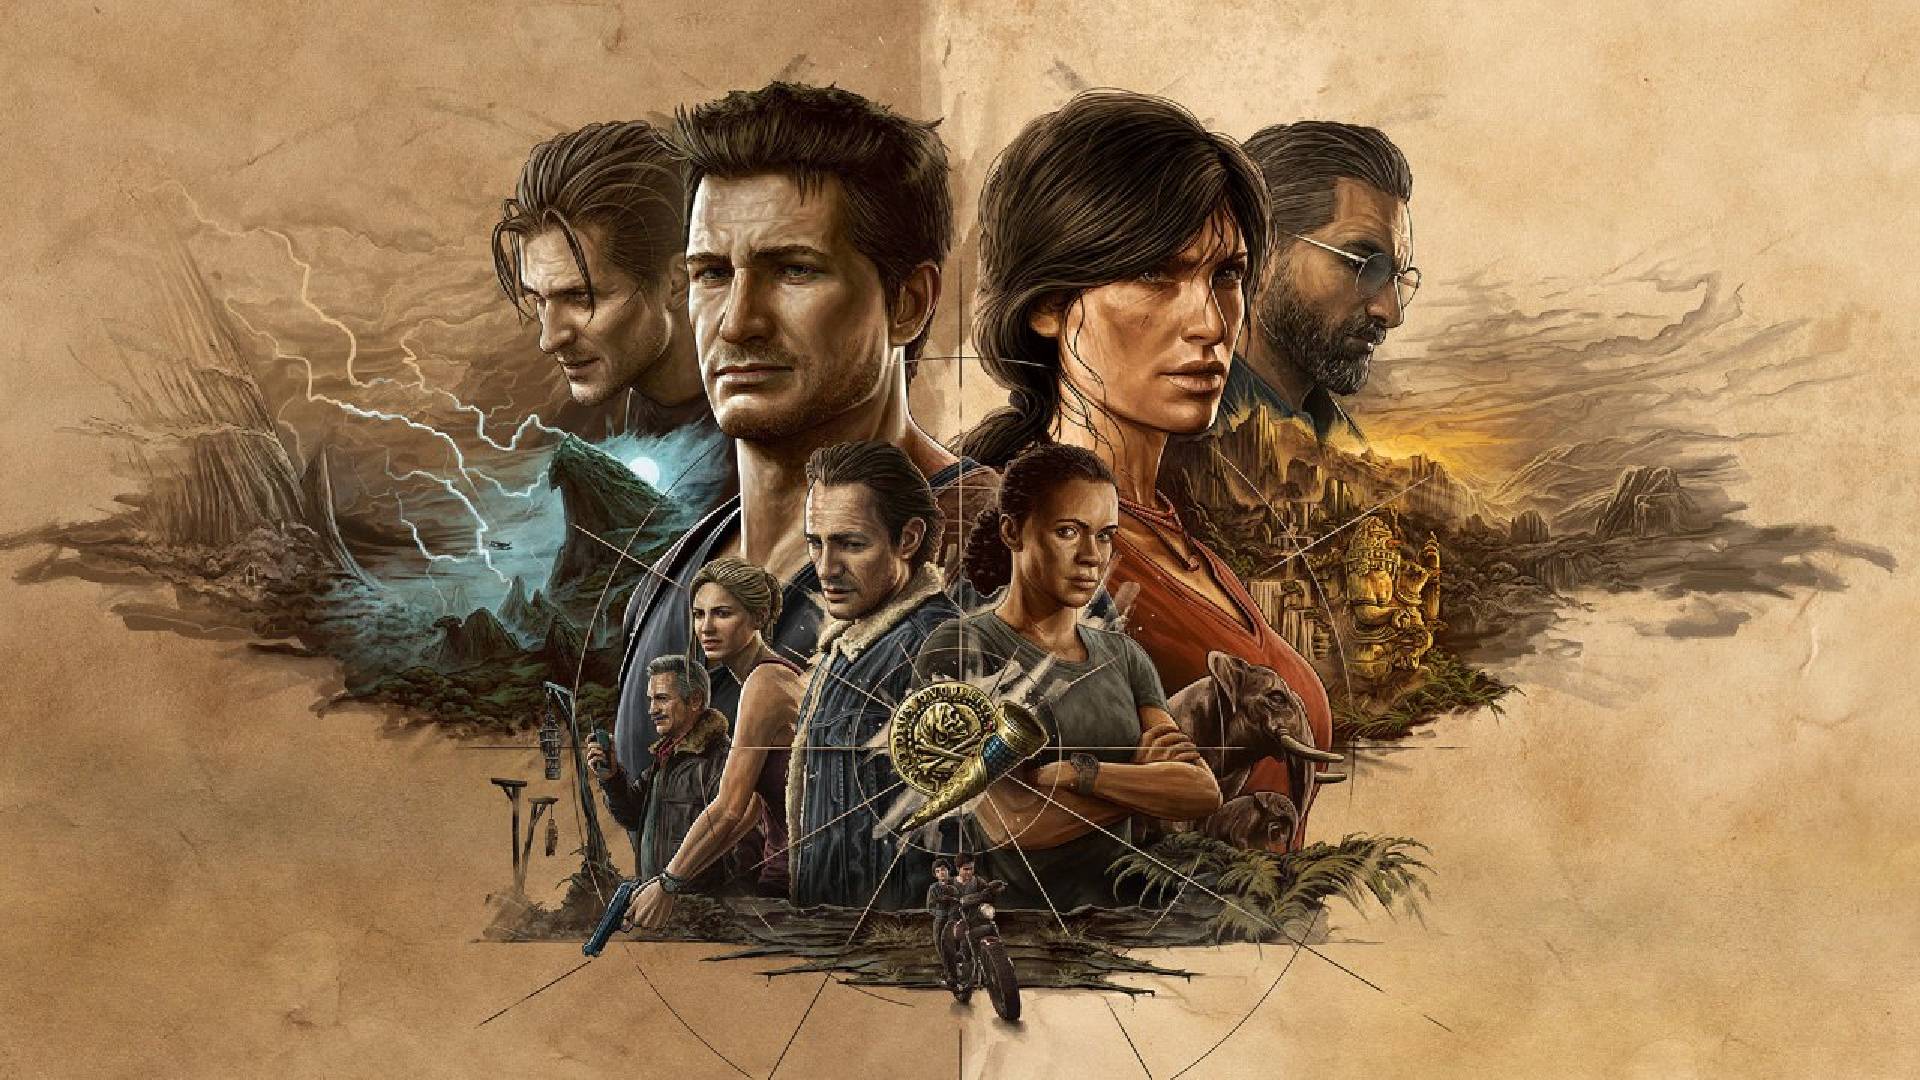 The cast of Uncharted 4 and The Lost Legacy can be seen in the game's key art.